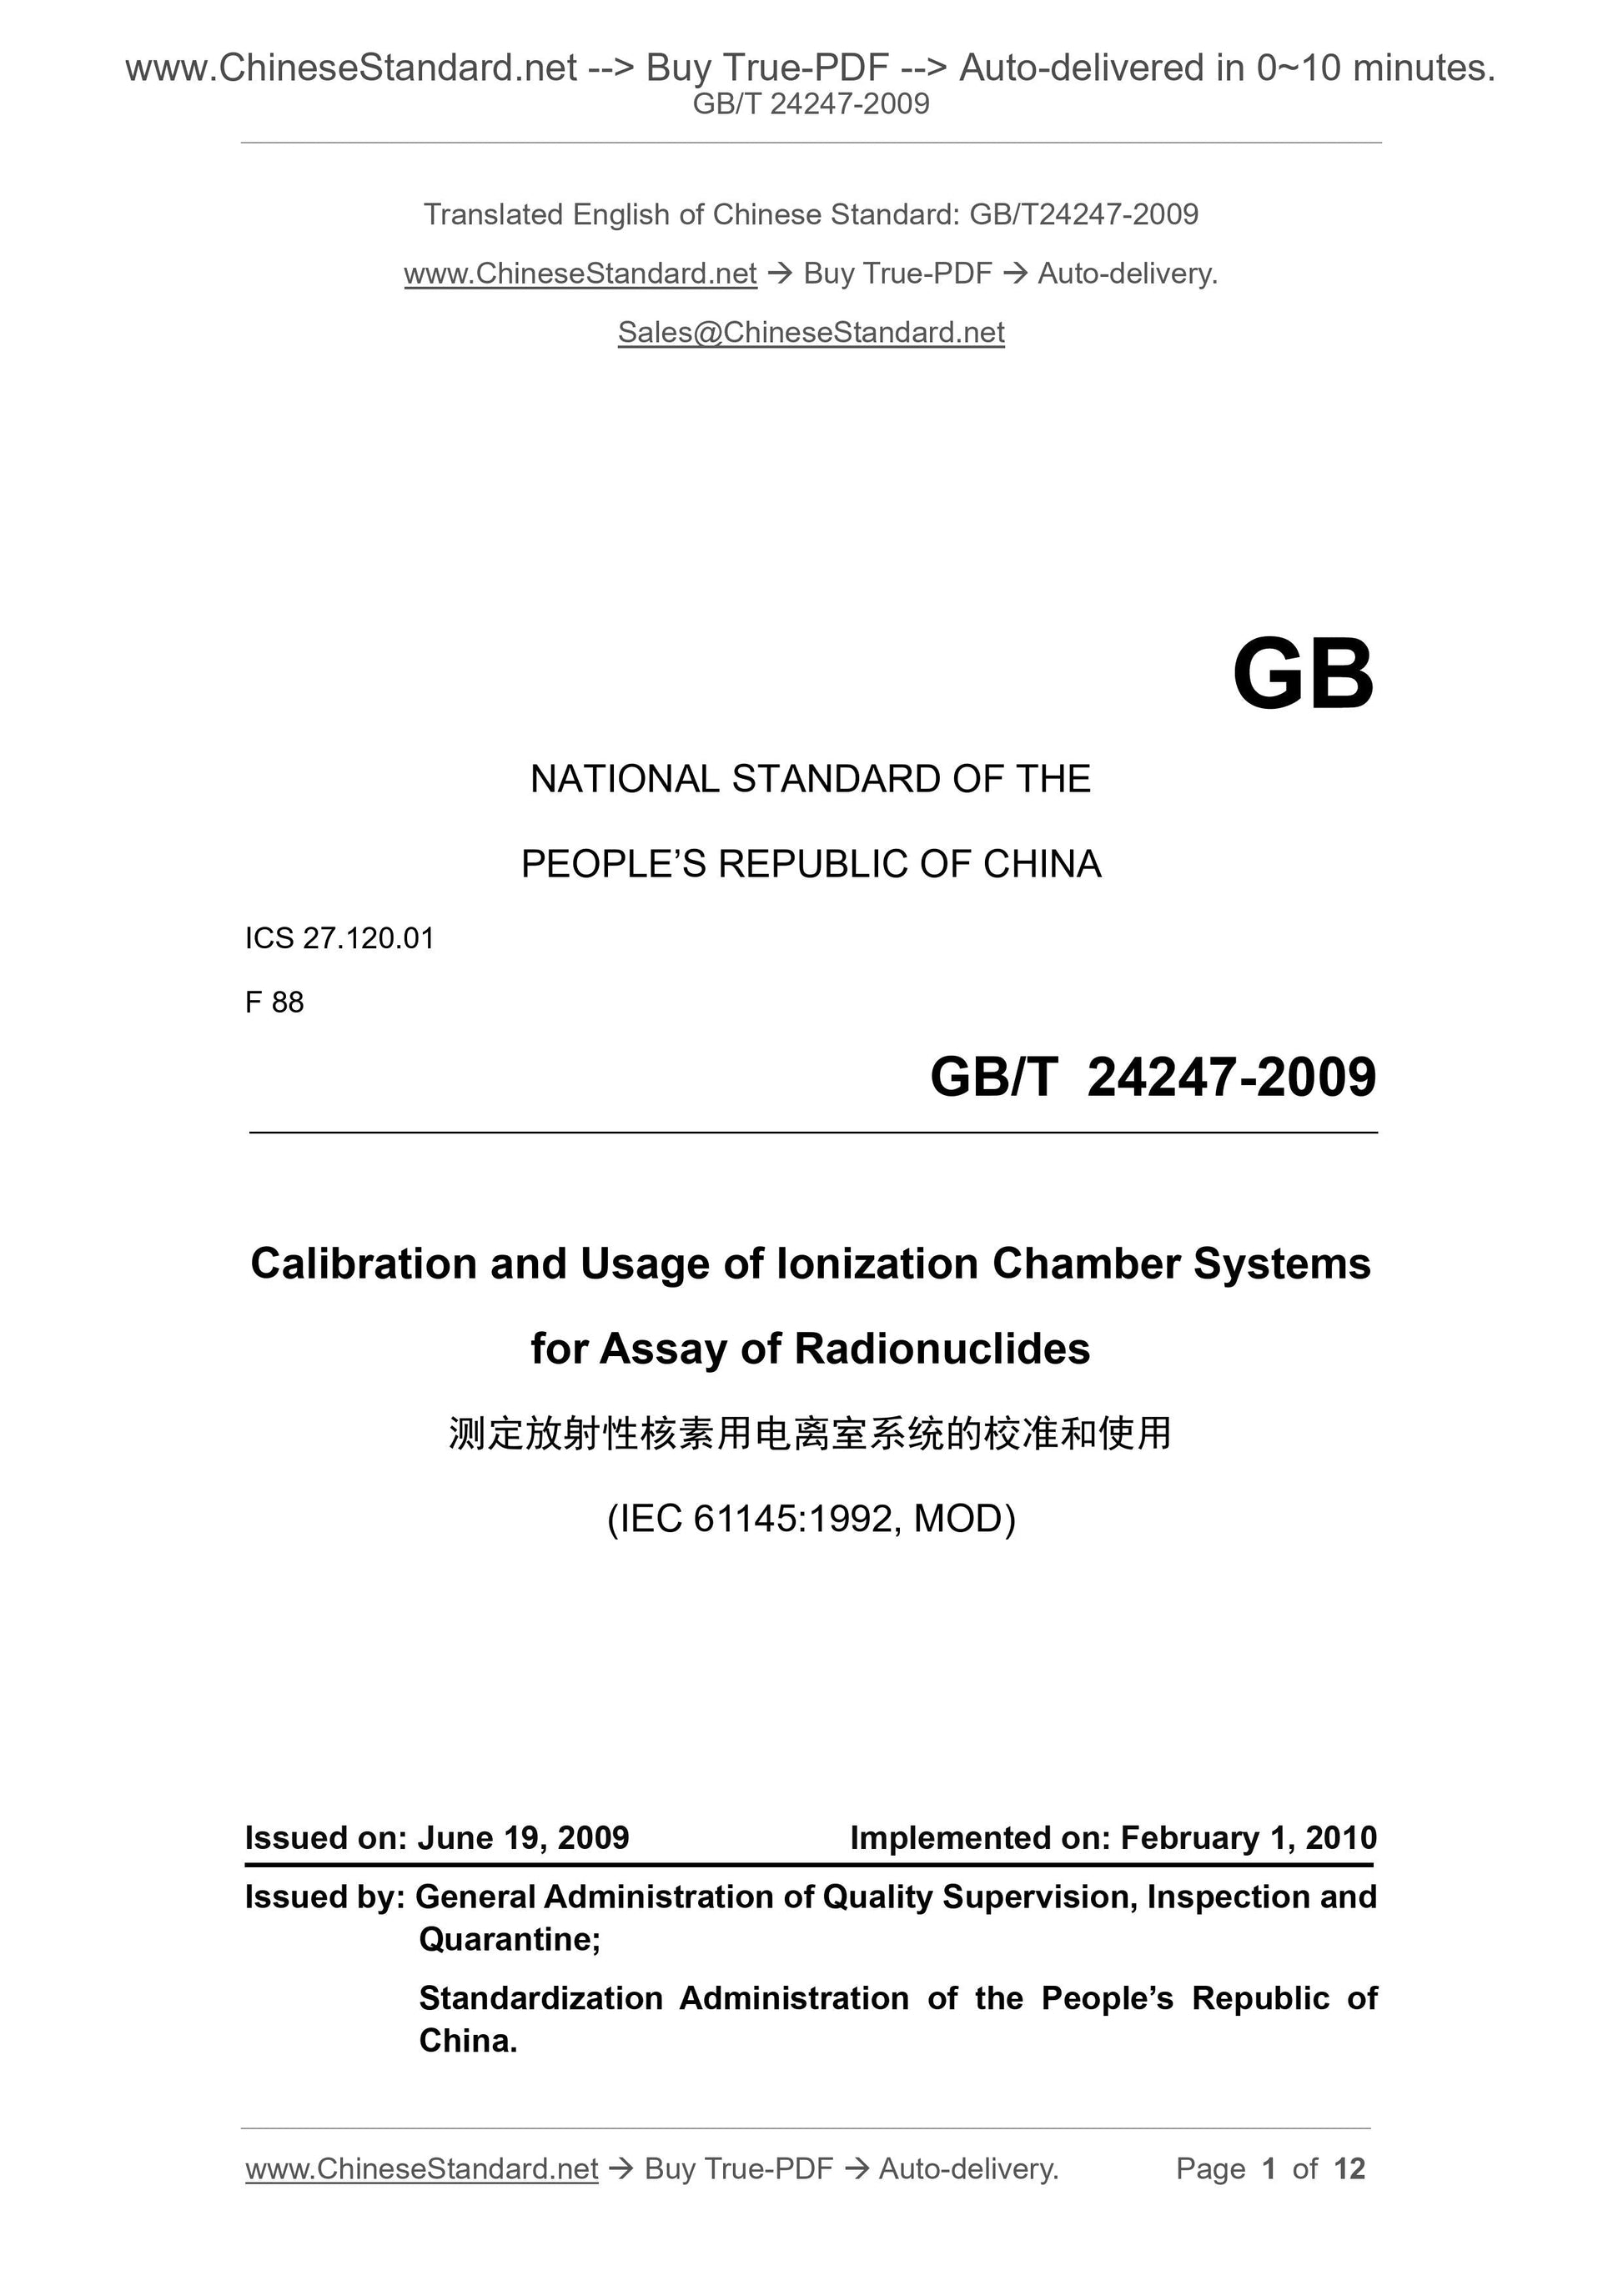 GB/T 24247-2009 Page 1